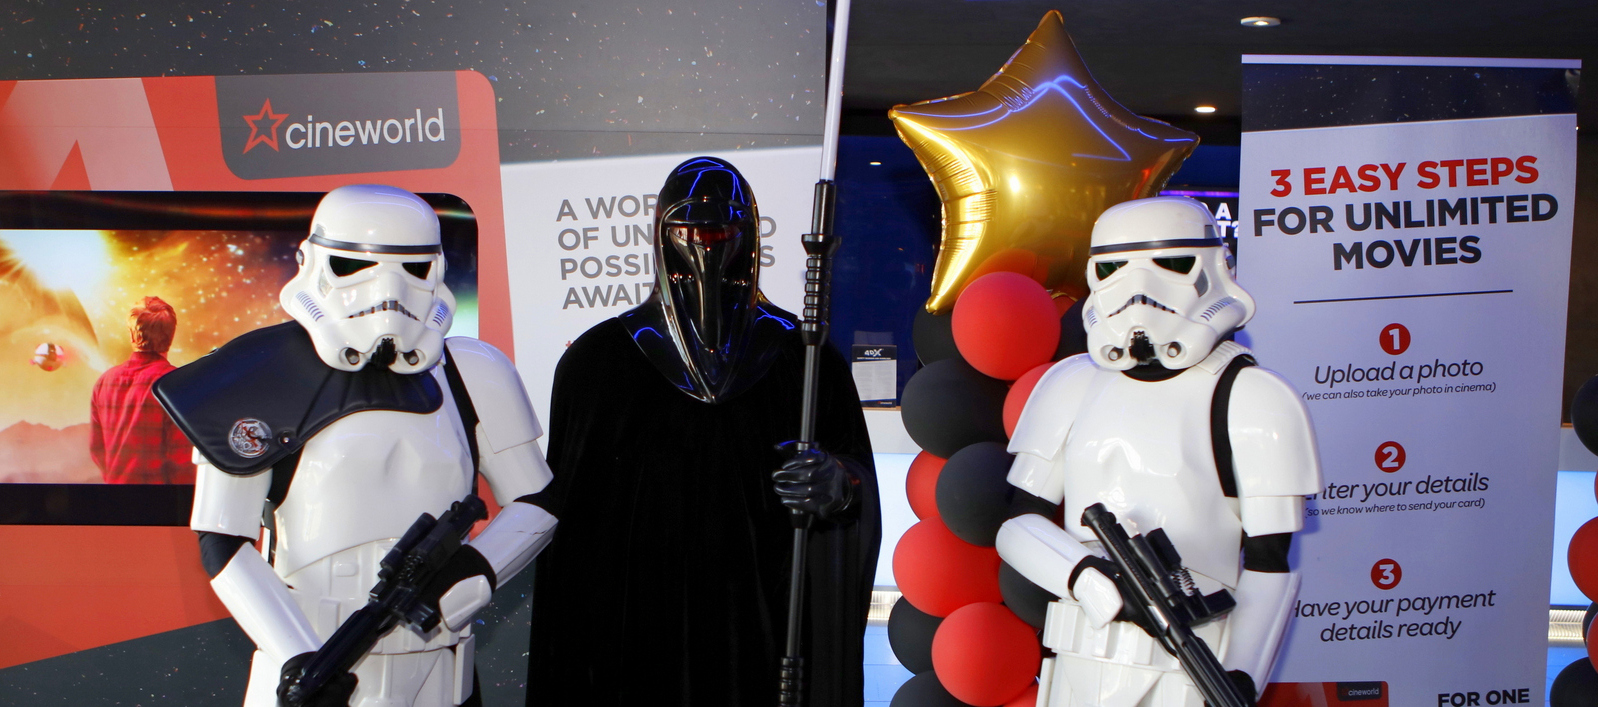 Aspergers, autism, Autism All Stars, autism awareness, characters, charity, cinema, Cineworld, cosplay, diversity, events, sussex, crawley, west sussex, Star Wars, Skywalker,